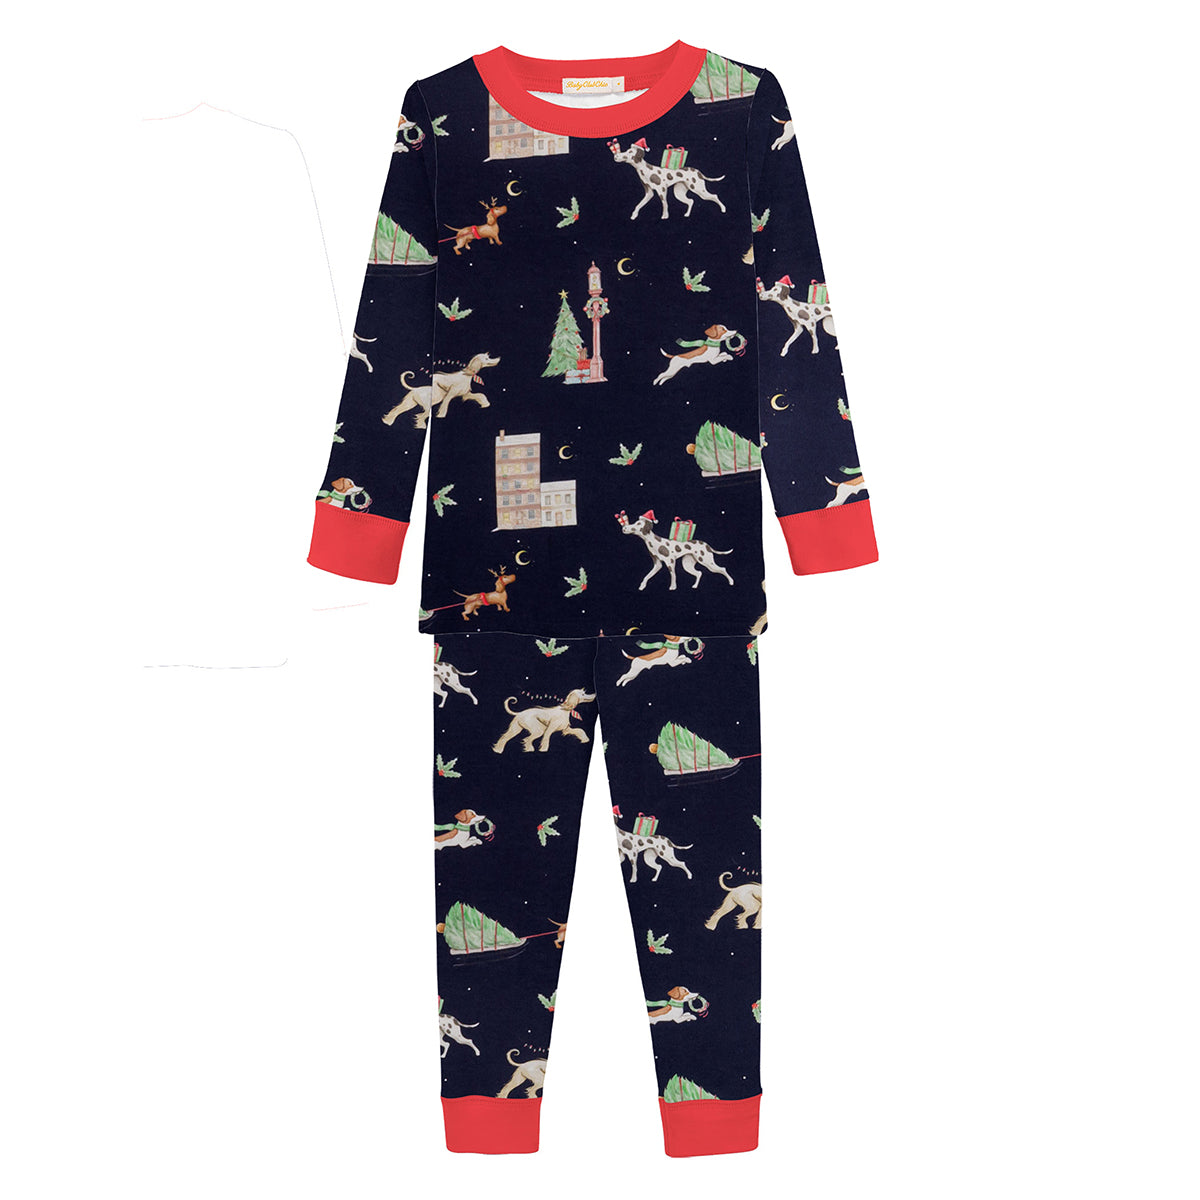 Baby Club Chic Holiday In The City Little Boy's Christmas Pajamas